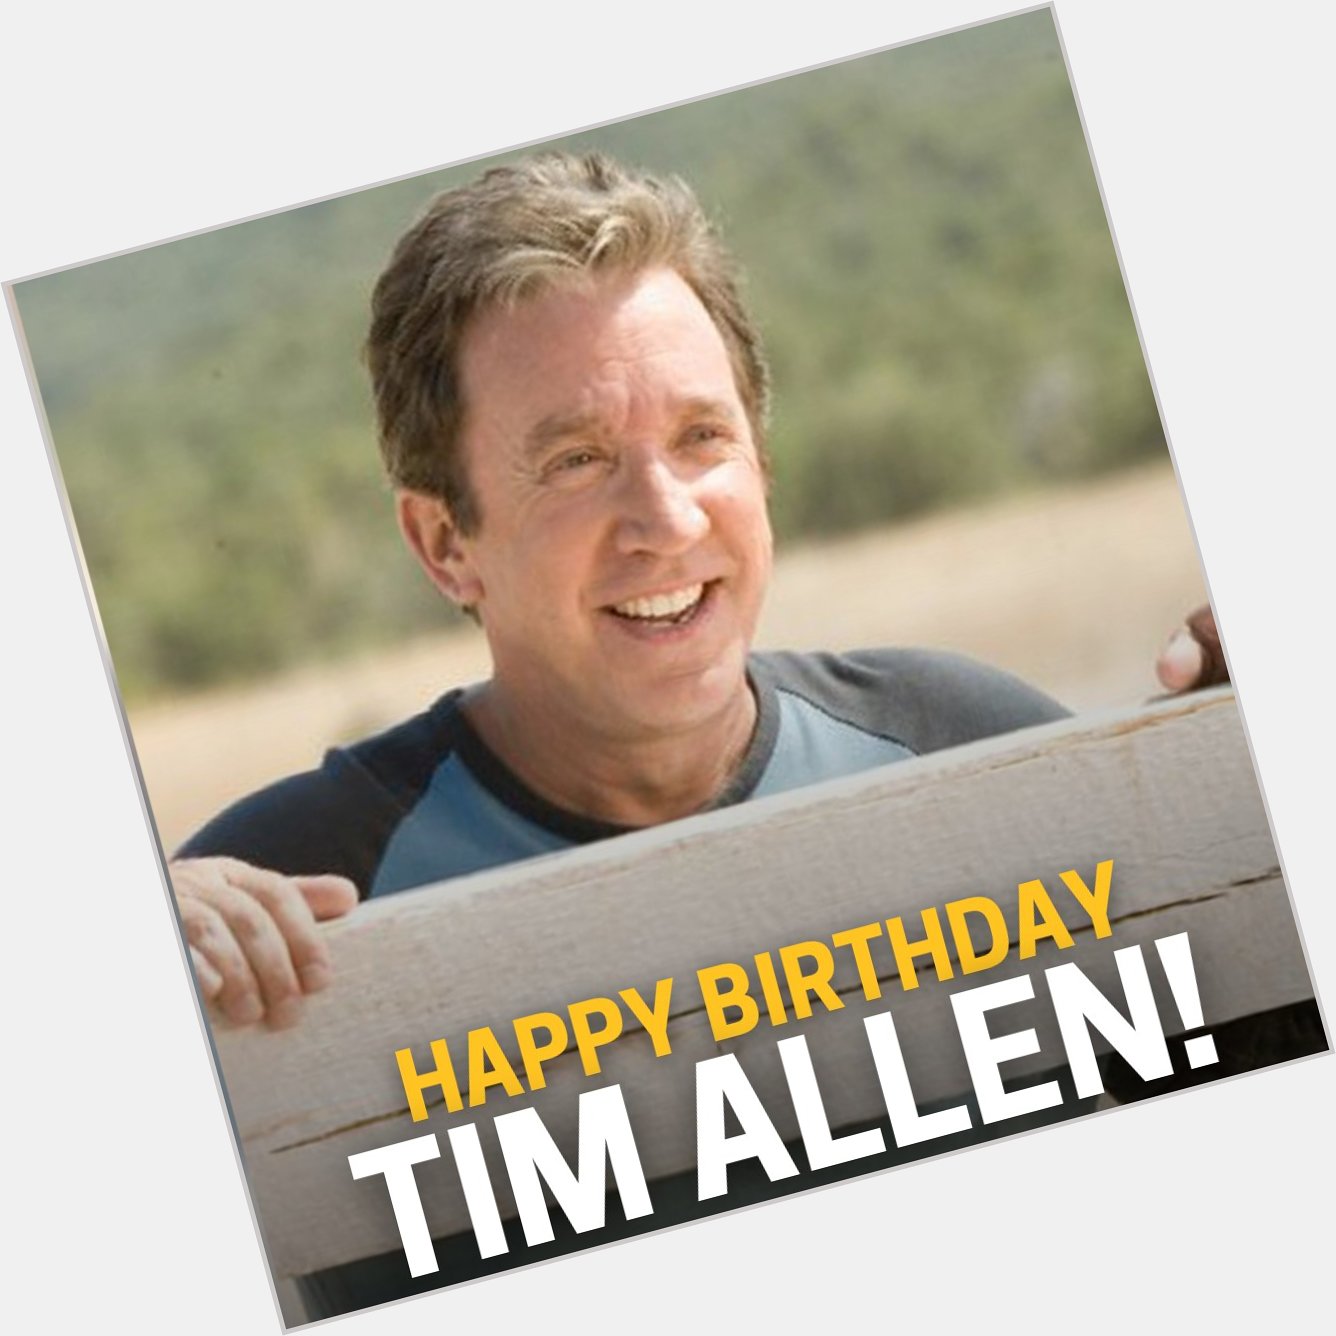 Happy birthday!! Do you have a favorite Tim Allen role? 